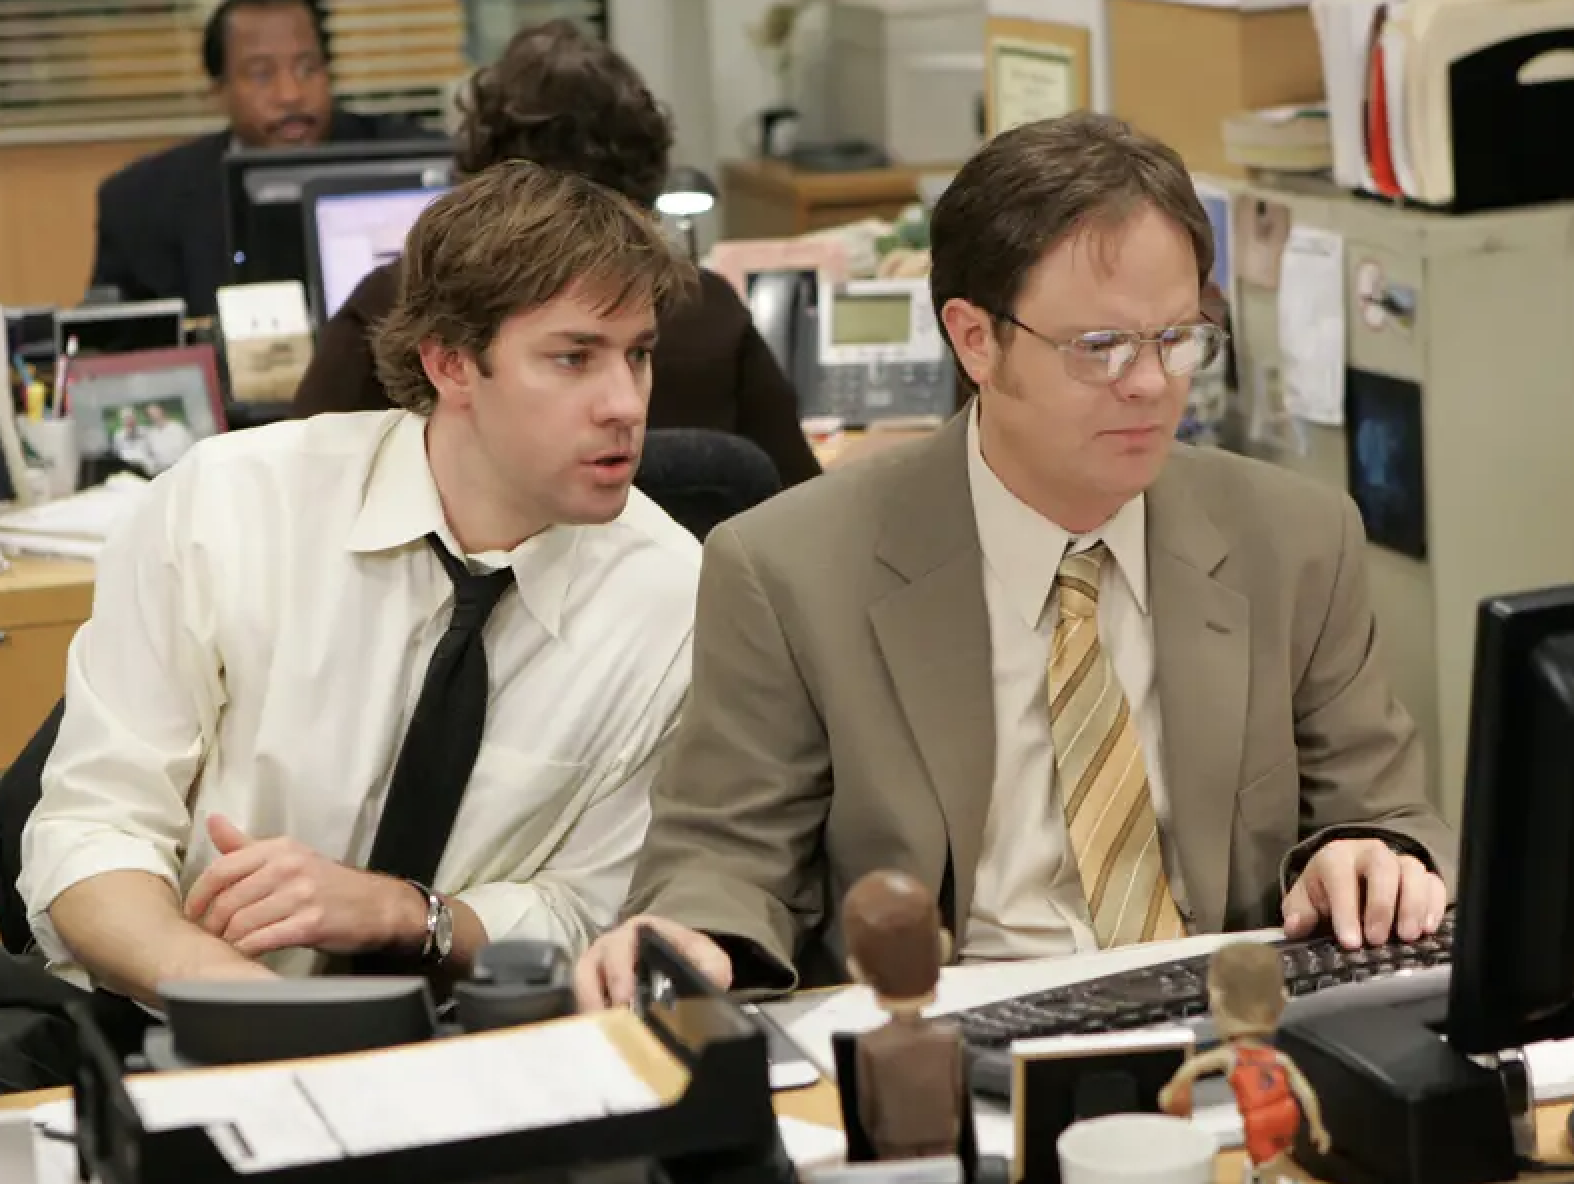 Two male characters from The Office, Jim and Dwight, seated at desks, appear to be working and discussing